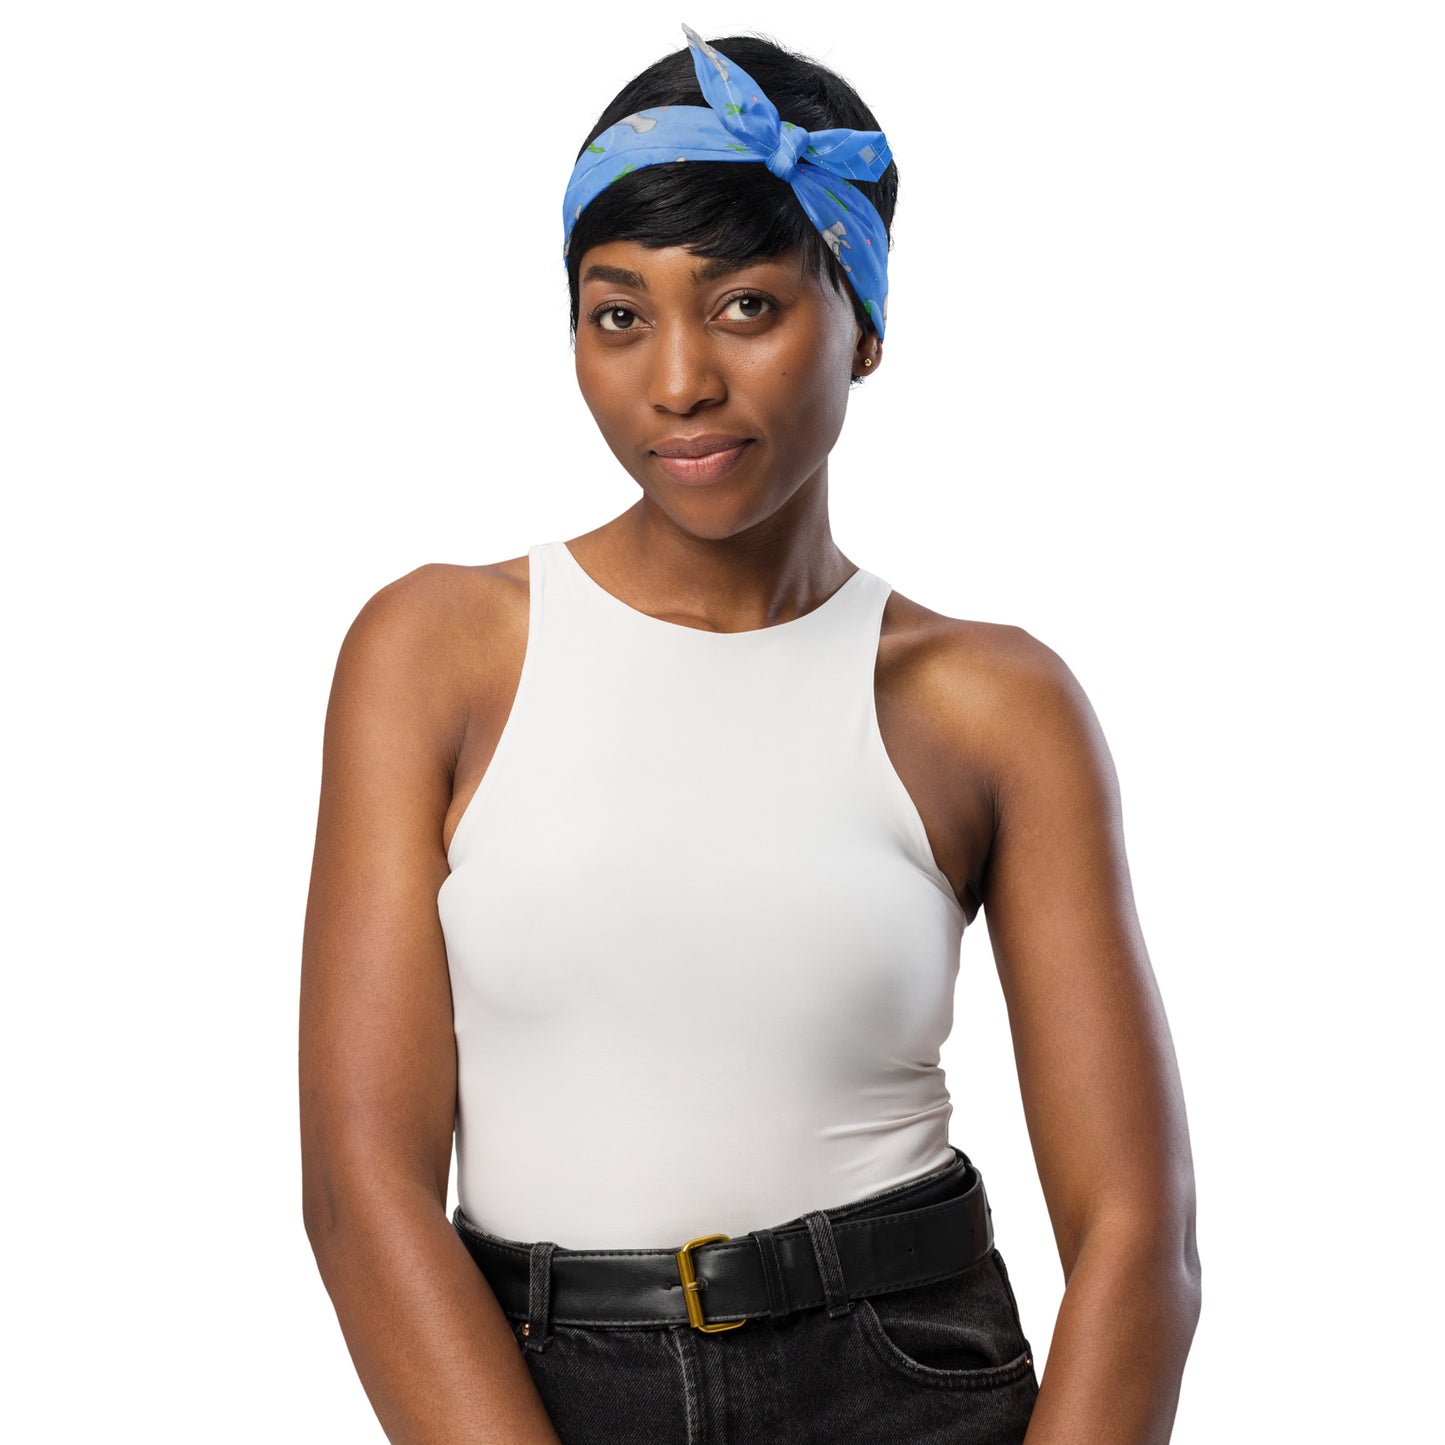 Manatee bandana. Shown as a headband on a female model. Features patterned design of hand-illustrated manatees, seaweed, seashells, and bubbles on a blue  background.